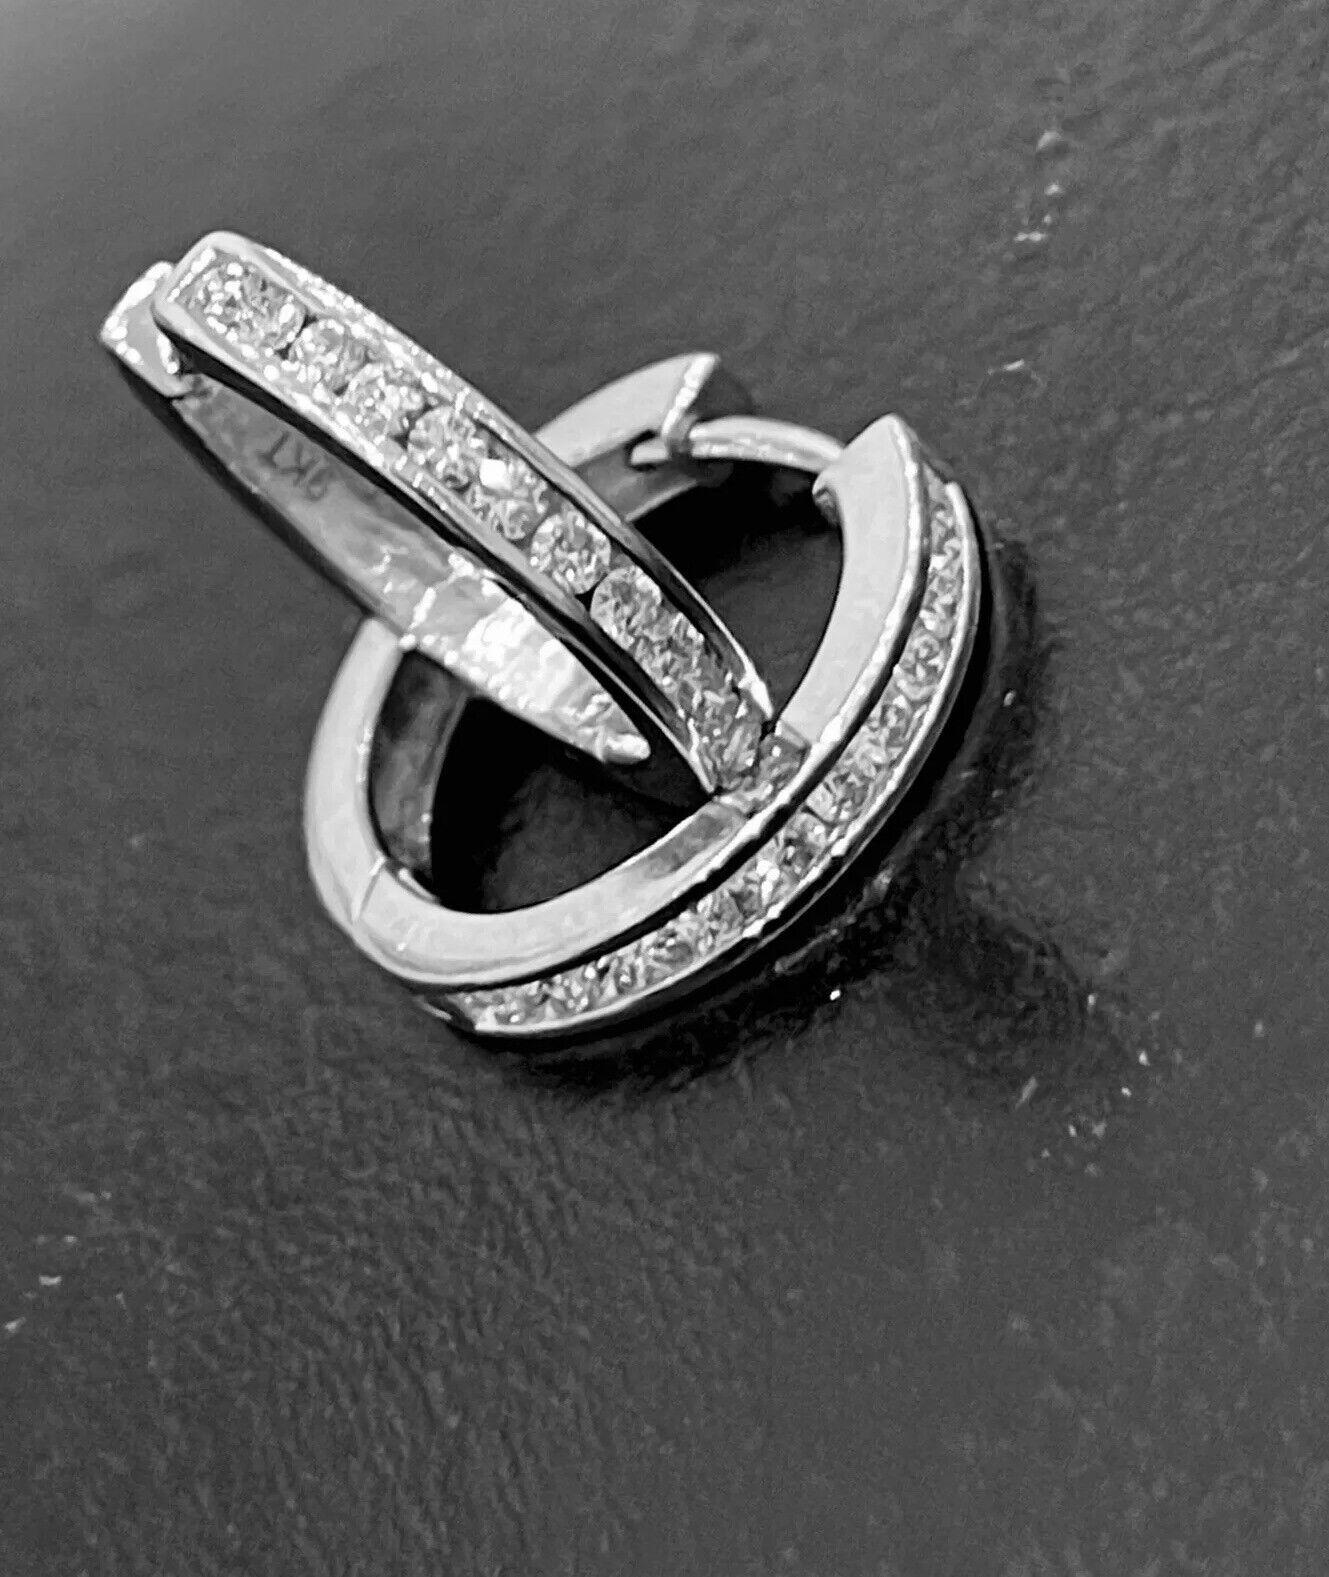 9ct White Gold Diamond Earrings 0.50ct channel set huggies hoops hallmarked 375 For Sale 2